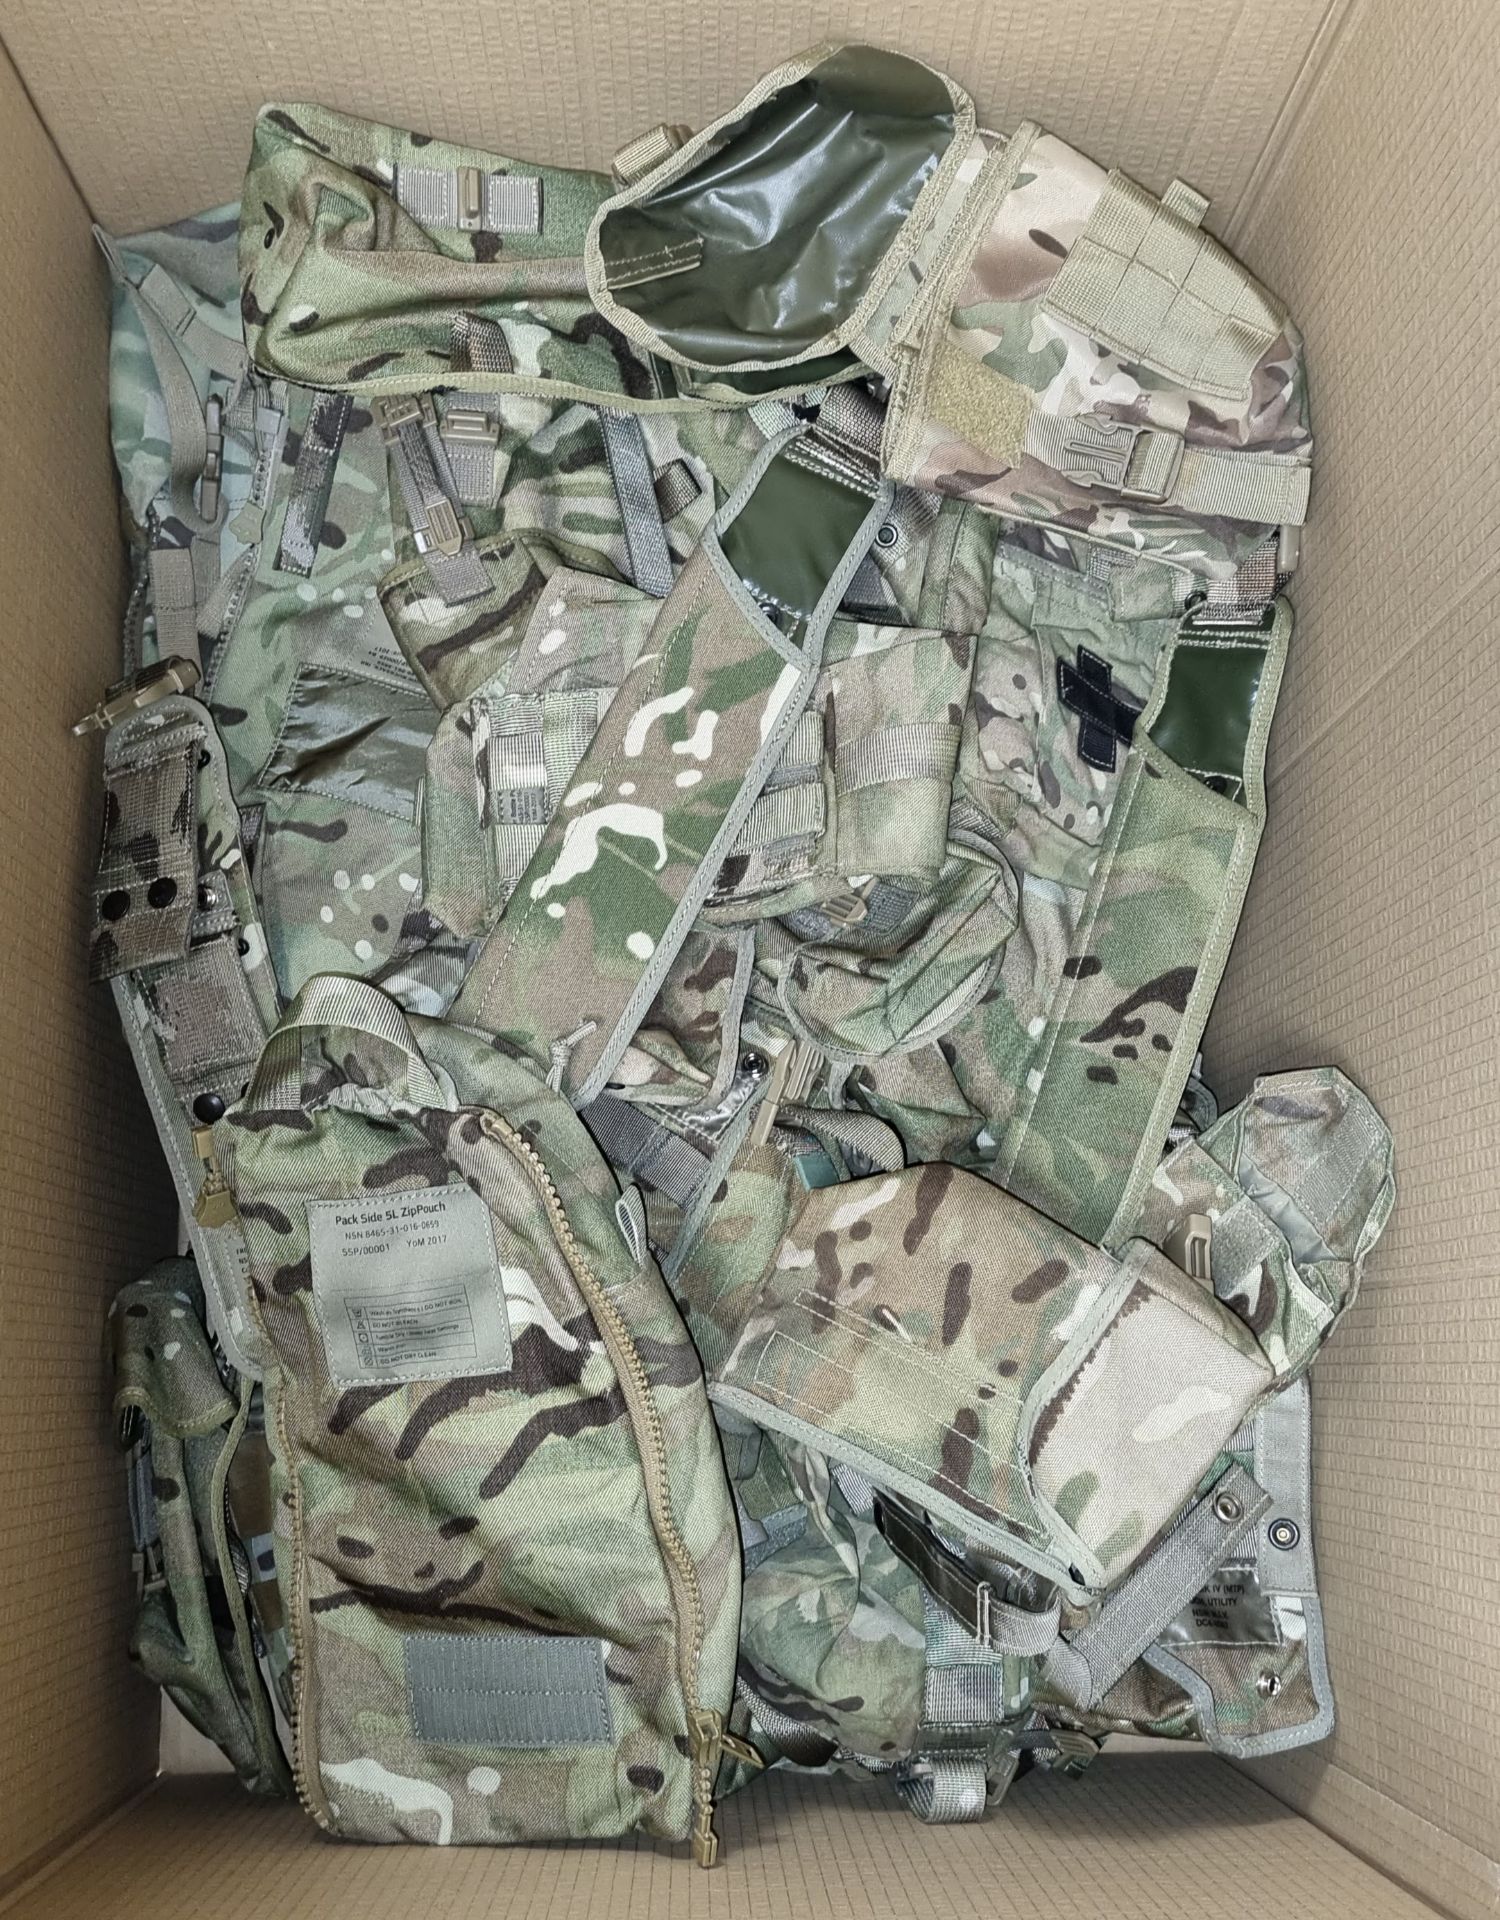 56x British Army MTP pouches - mixed types - mixed sizes - mixed grades - Image 12 of 12